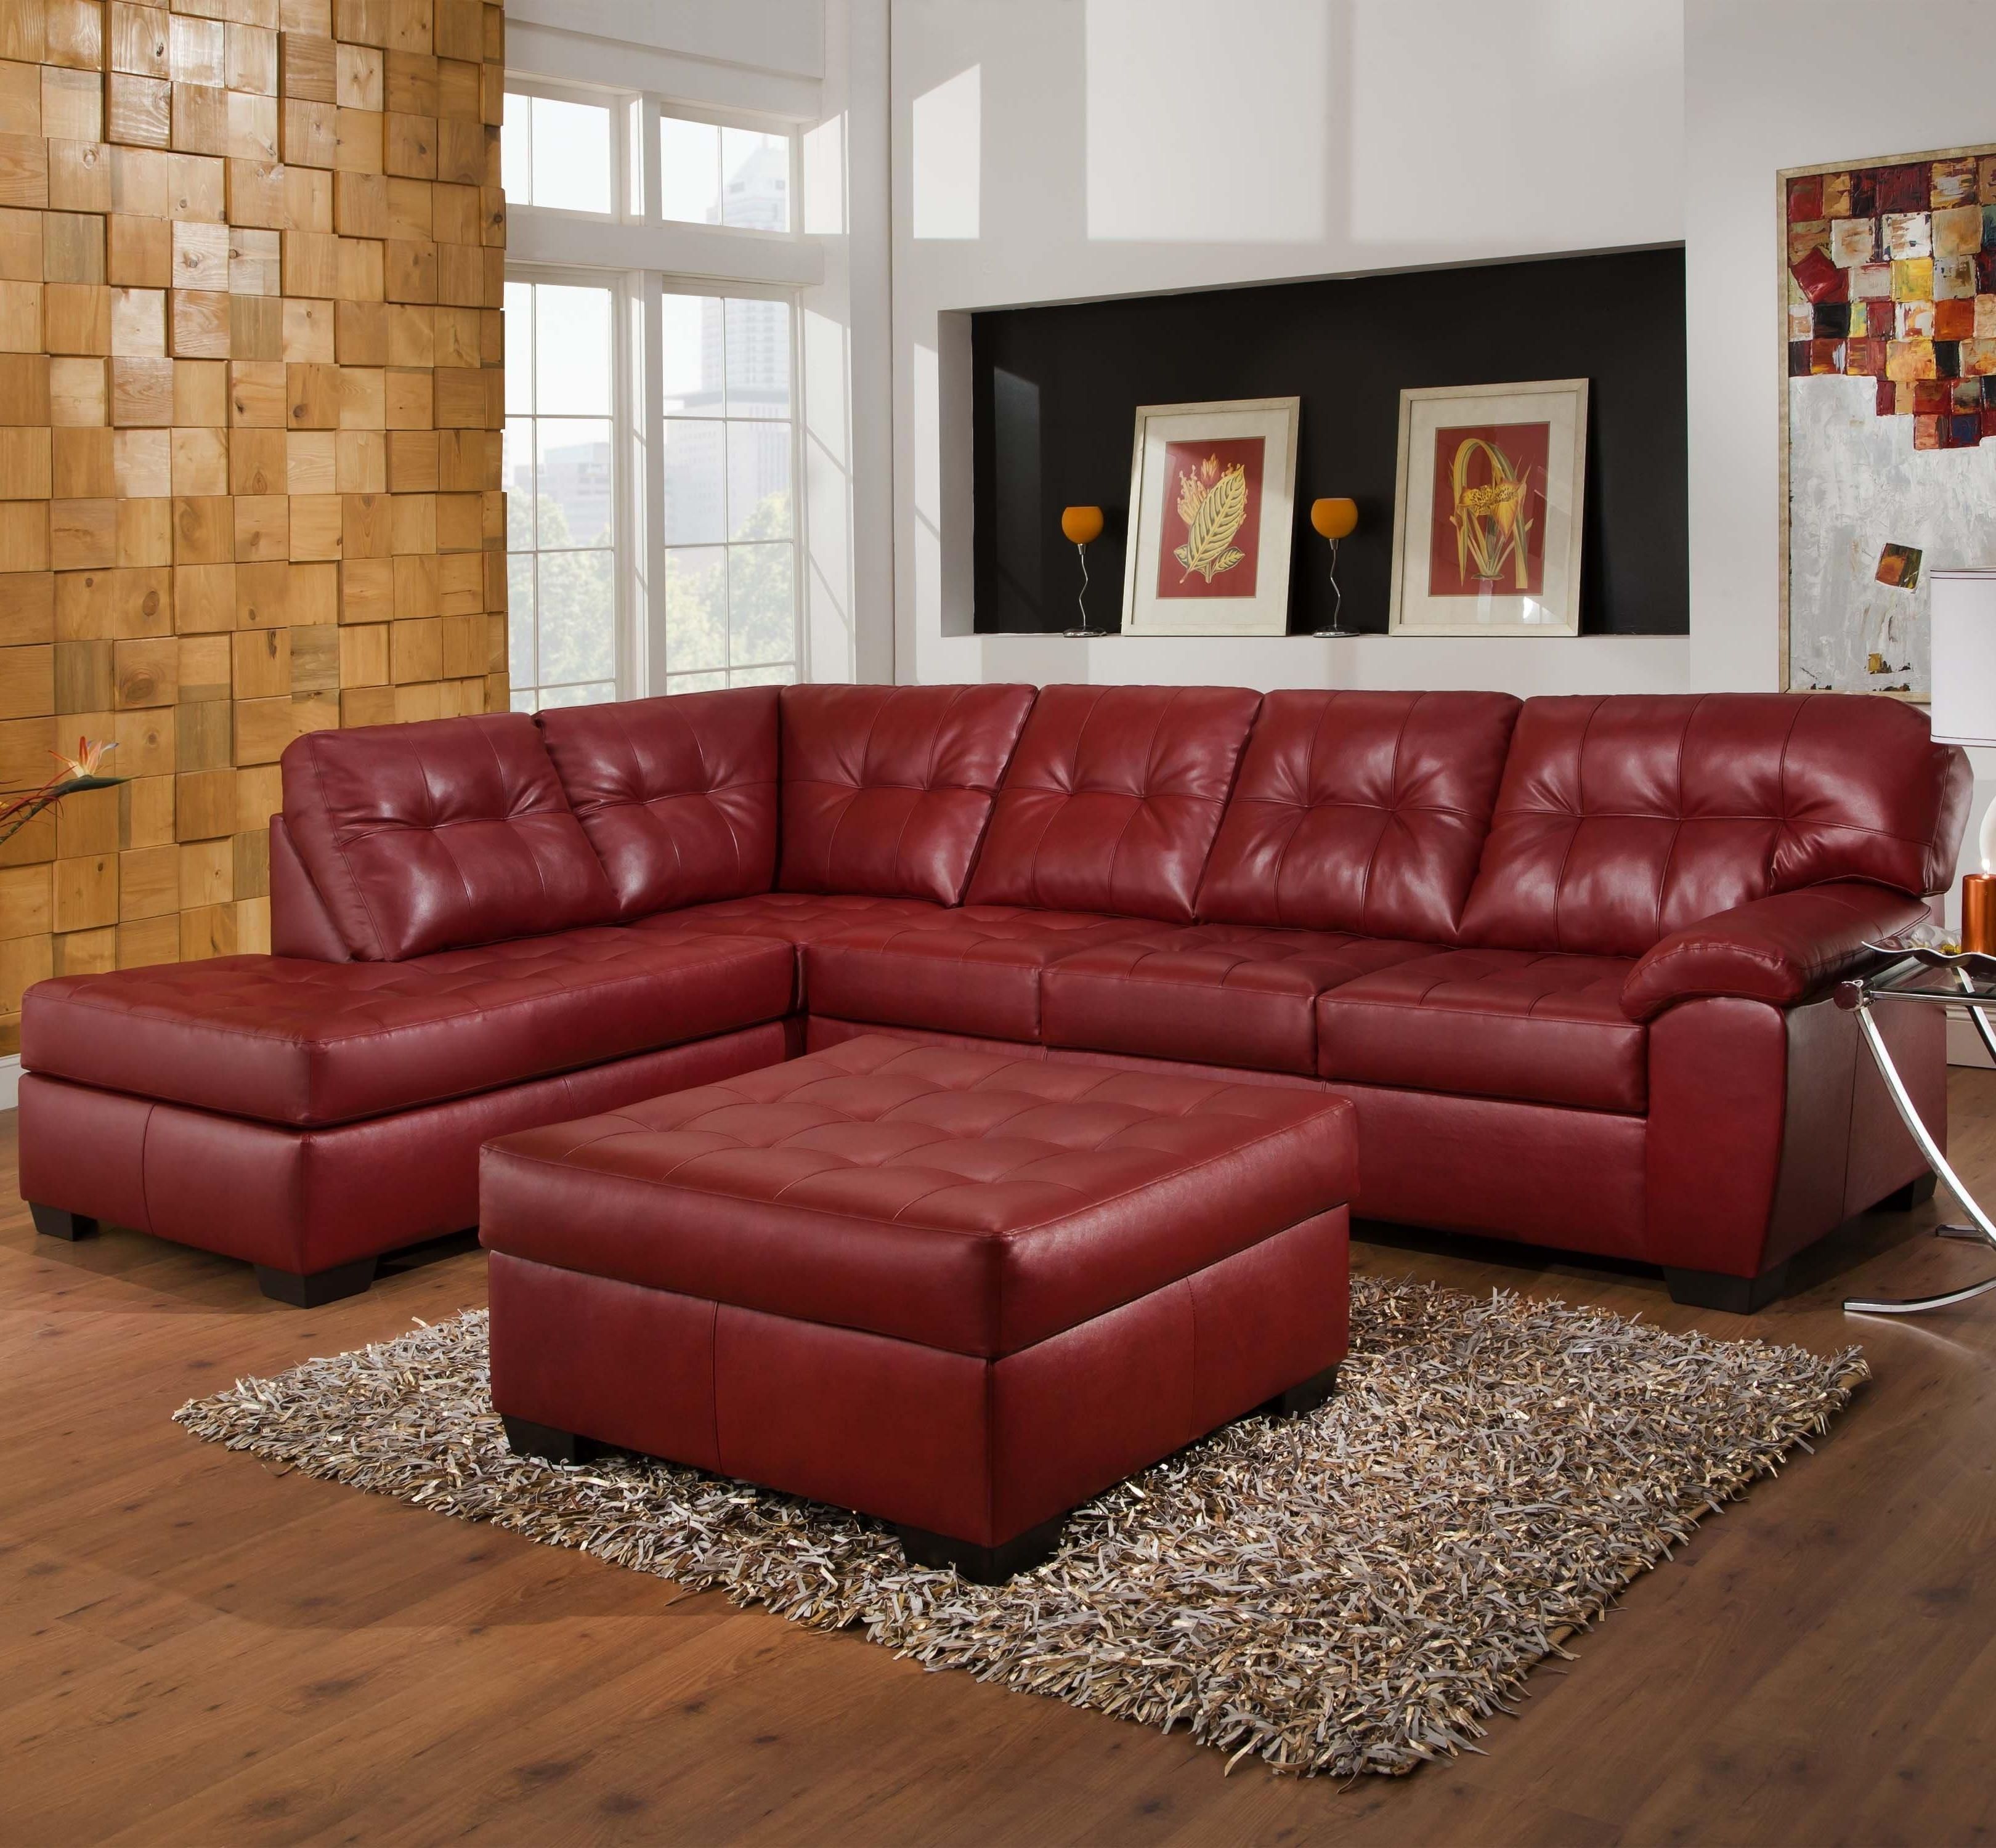 Grand Rapids Mi Sectional Sofas Within Trendy 9569 2 Piece Sectional With Tufted Seats & Backsimmons (Photo 13 of 15)